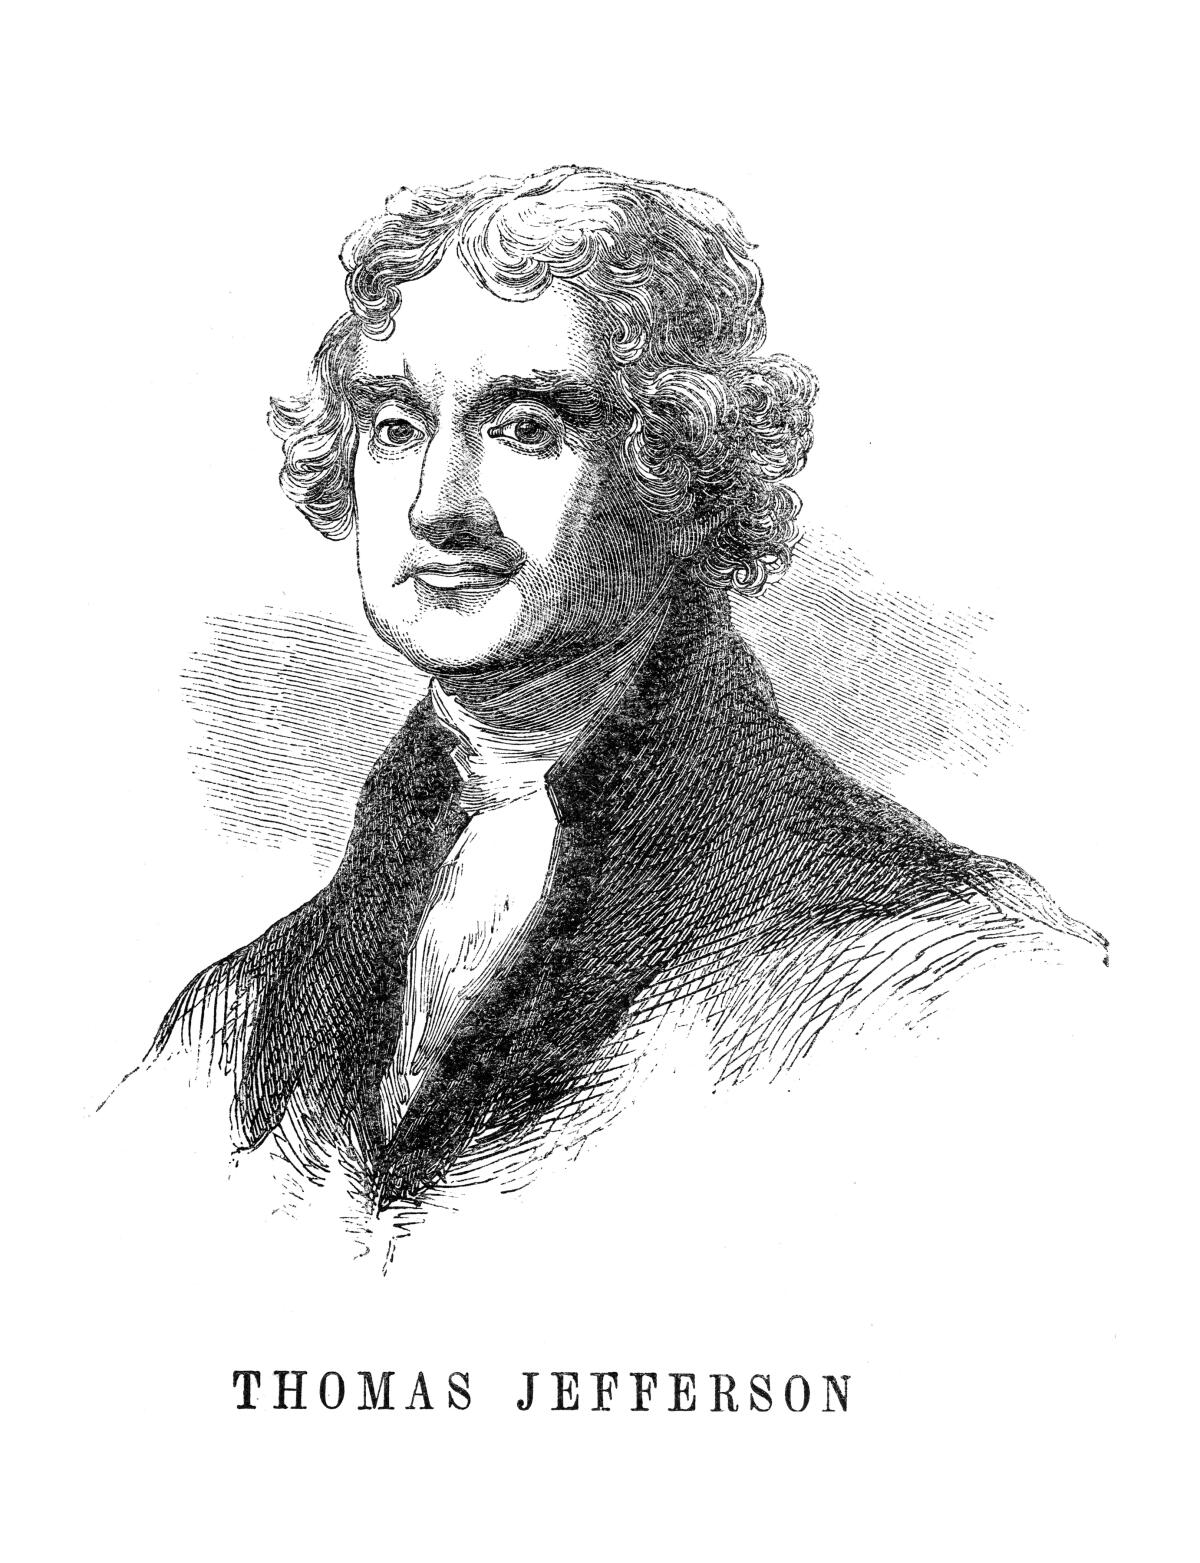 Photo of an original engraving from the American Portrait Gallery by AD Jones published in 1855.